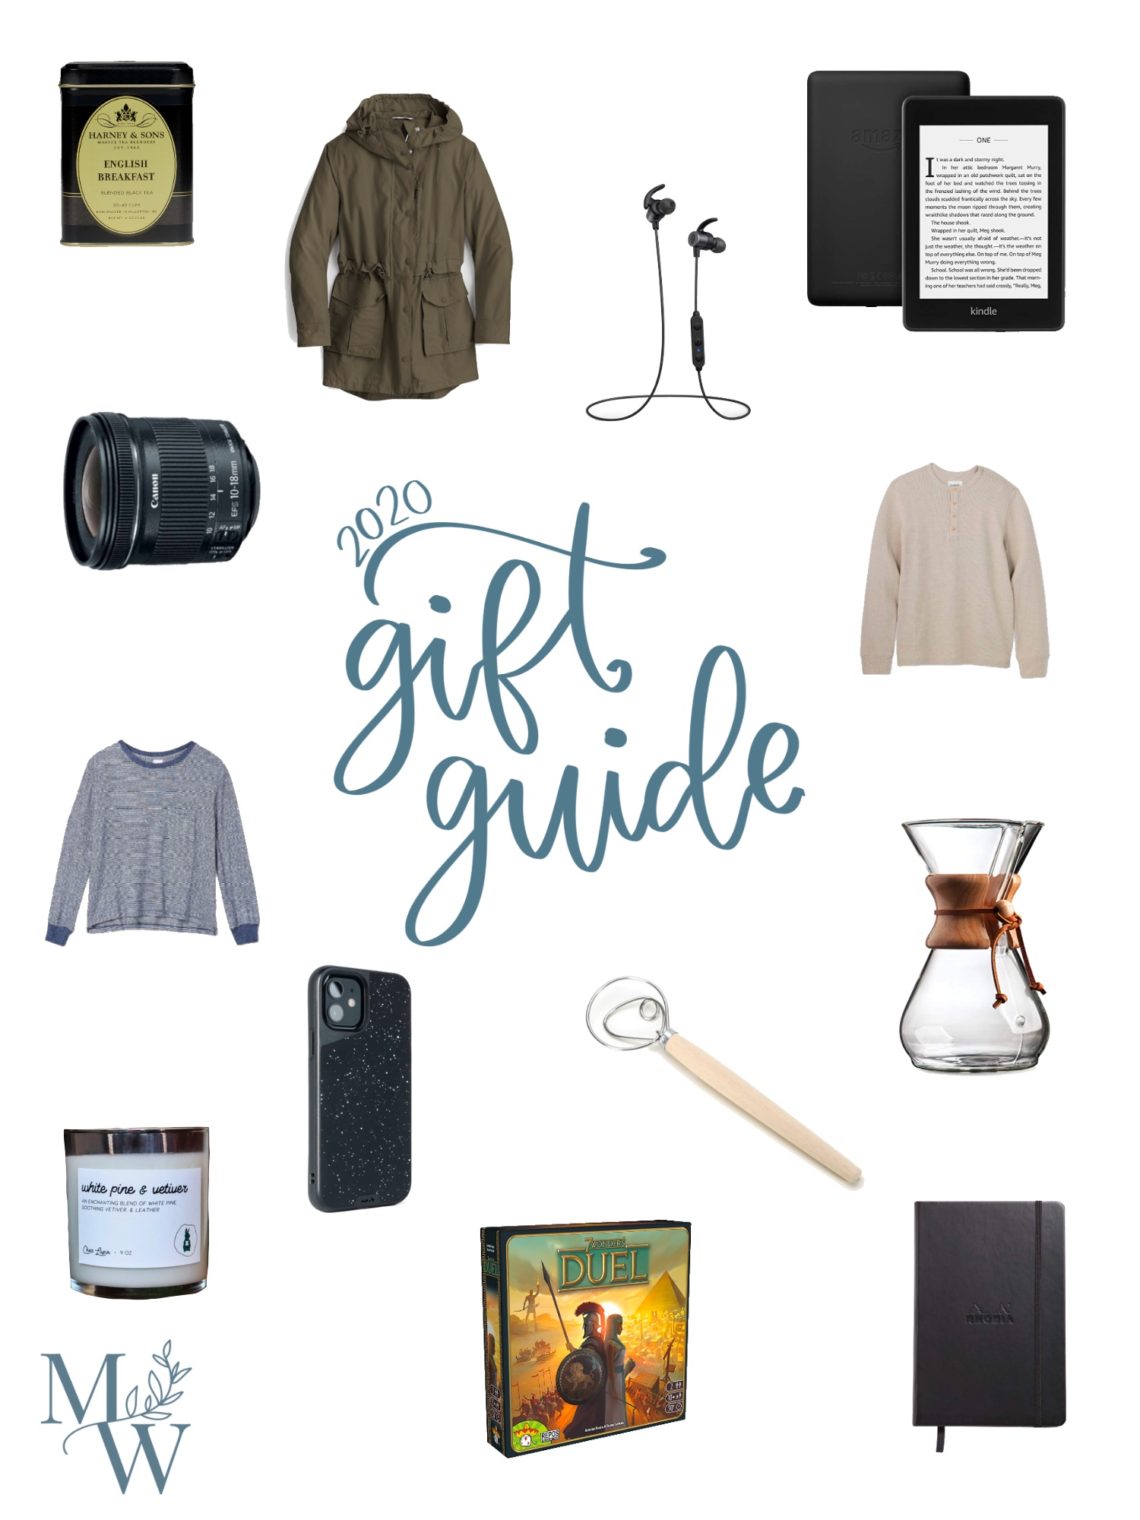 2020 Gift Guide - tried and tested Christmas gift ideas!